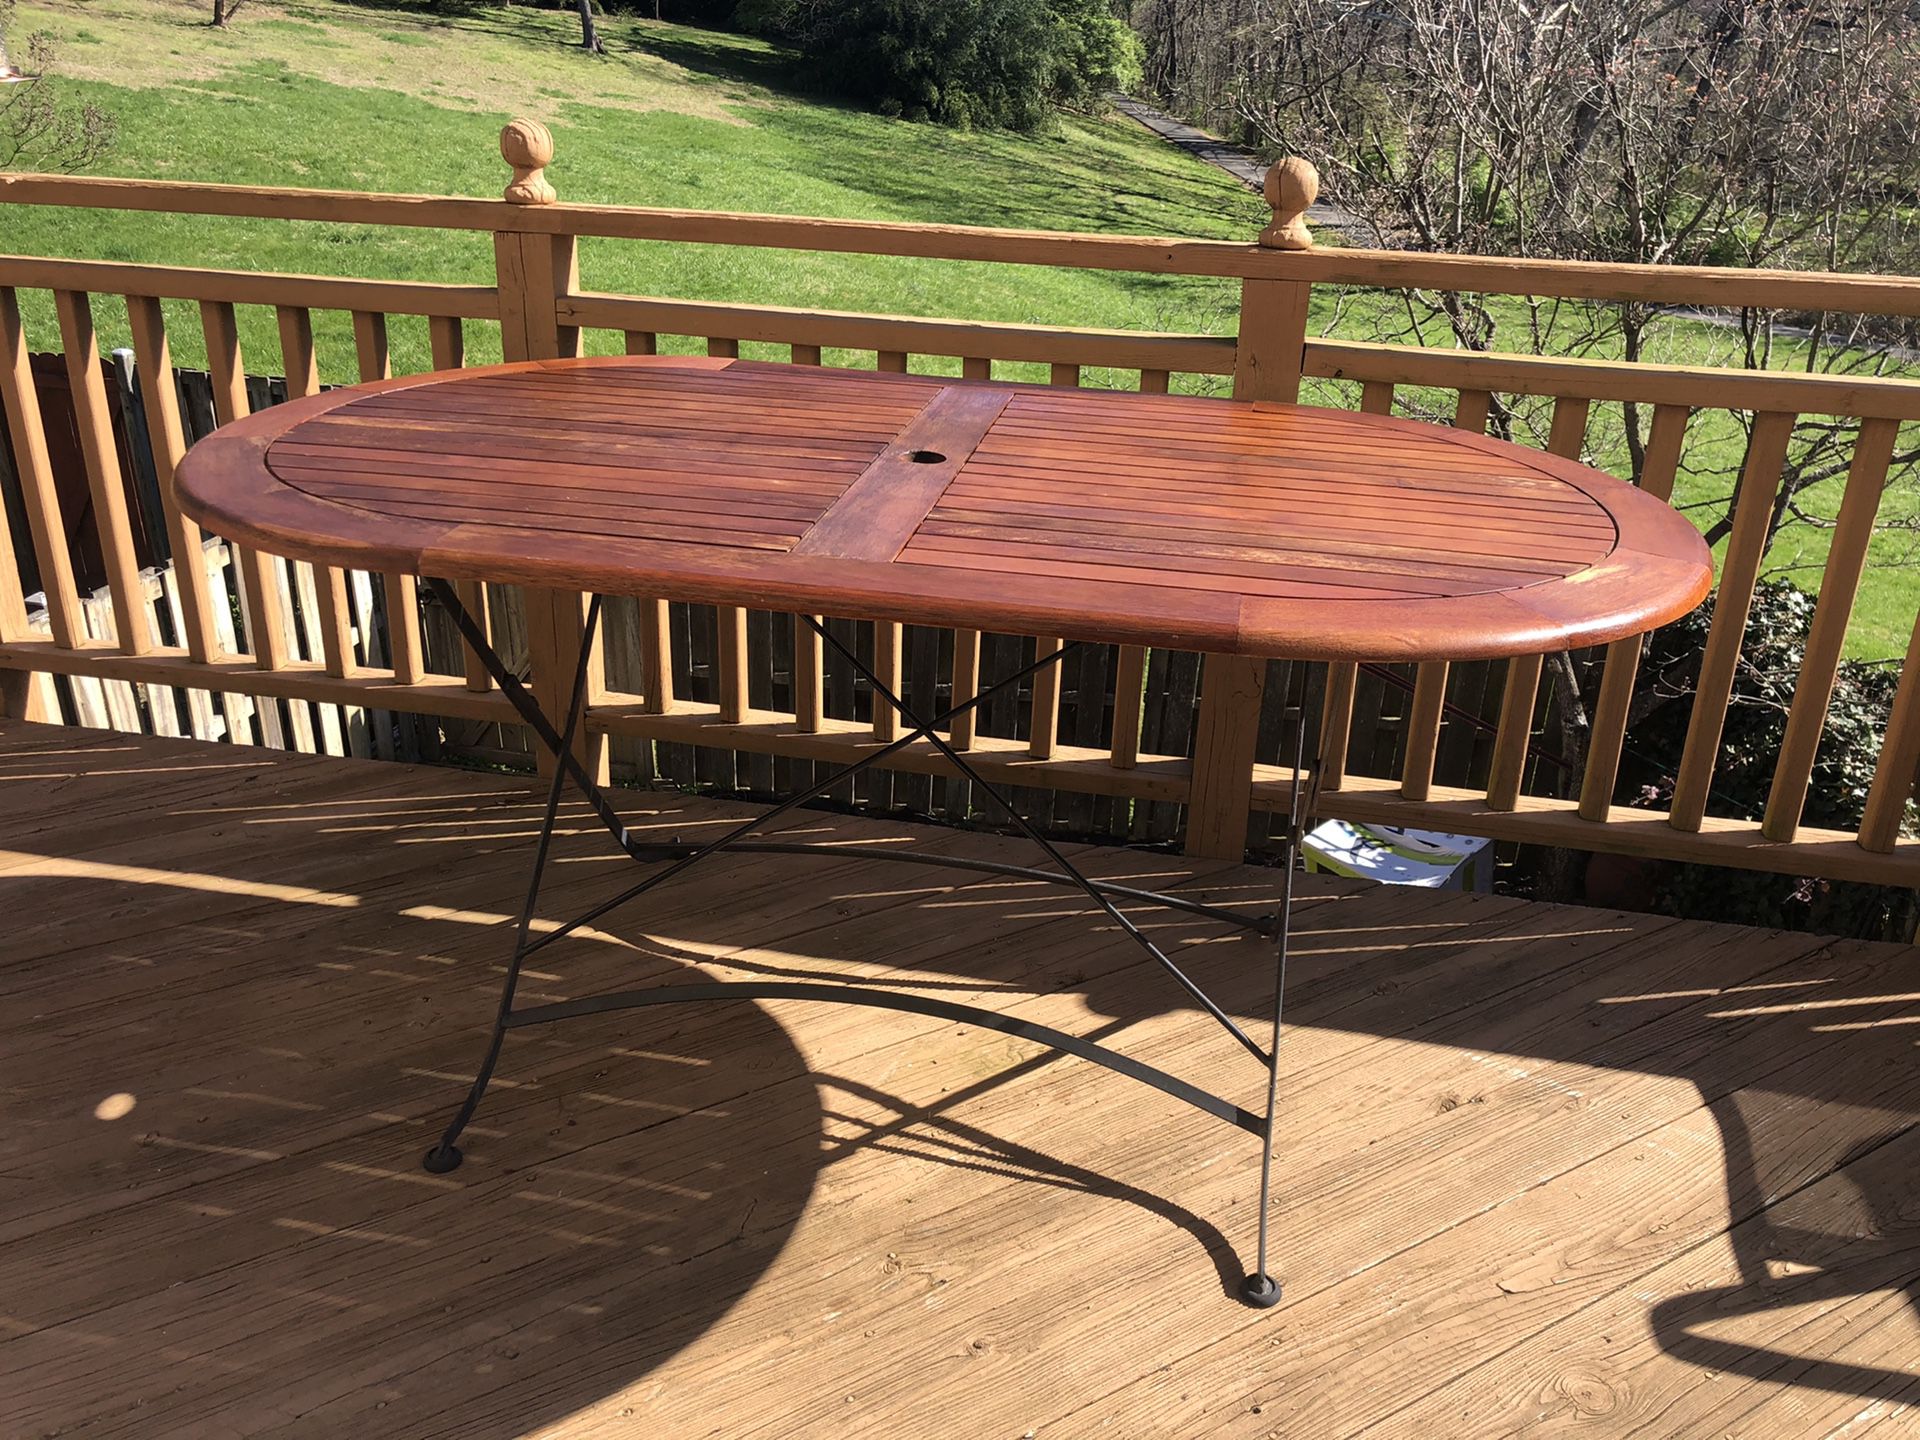 Patio dining table(foldable) with 4 chairs